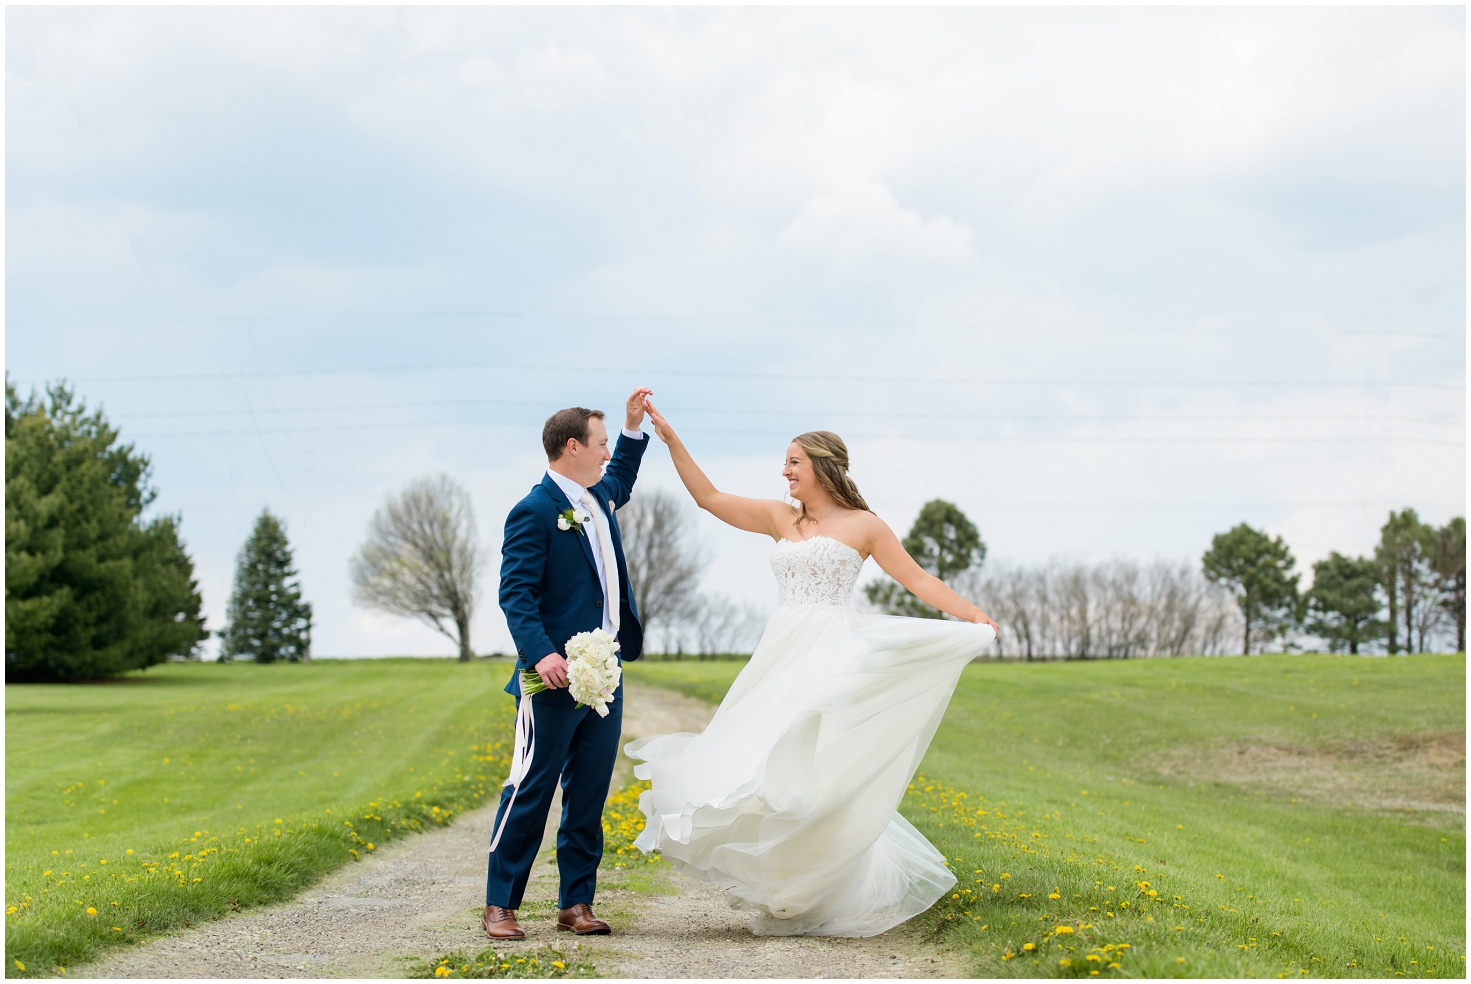 Image from an Iowa Wedding Photographer of couple dancing in the sunlight